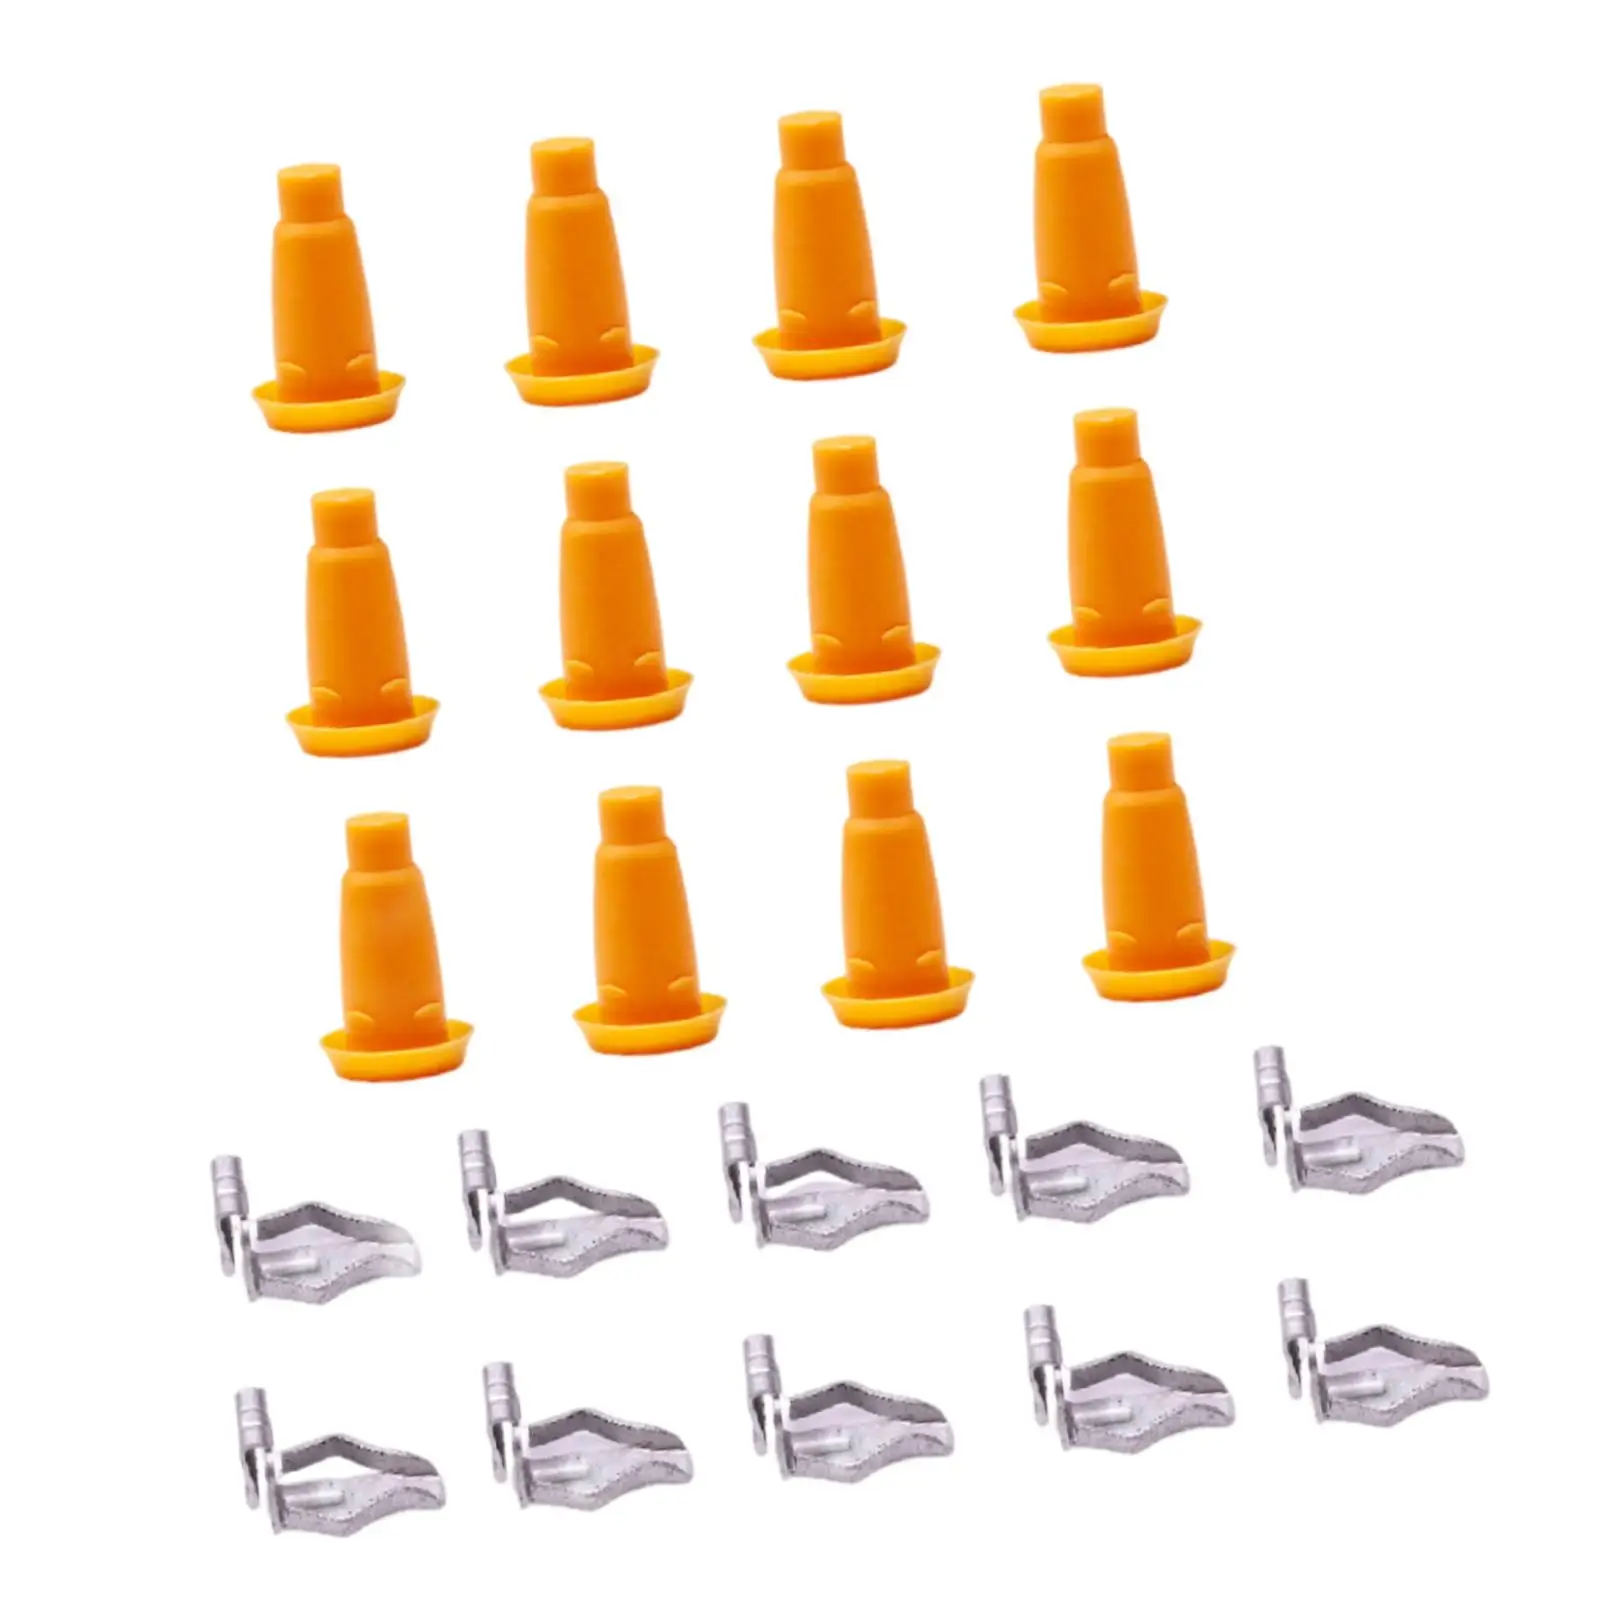 24Pcs Front Door Panel Clip Frame Plugs Clips Kit 4500027 for Chevy Camaro Chevelle Corvair Accessories Stable Performance